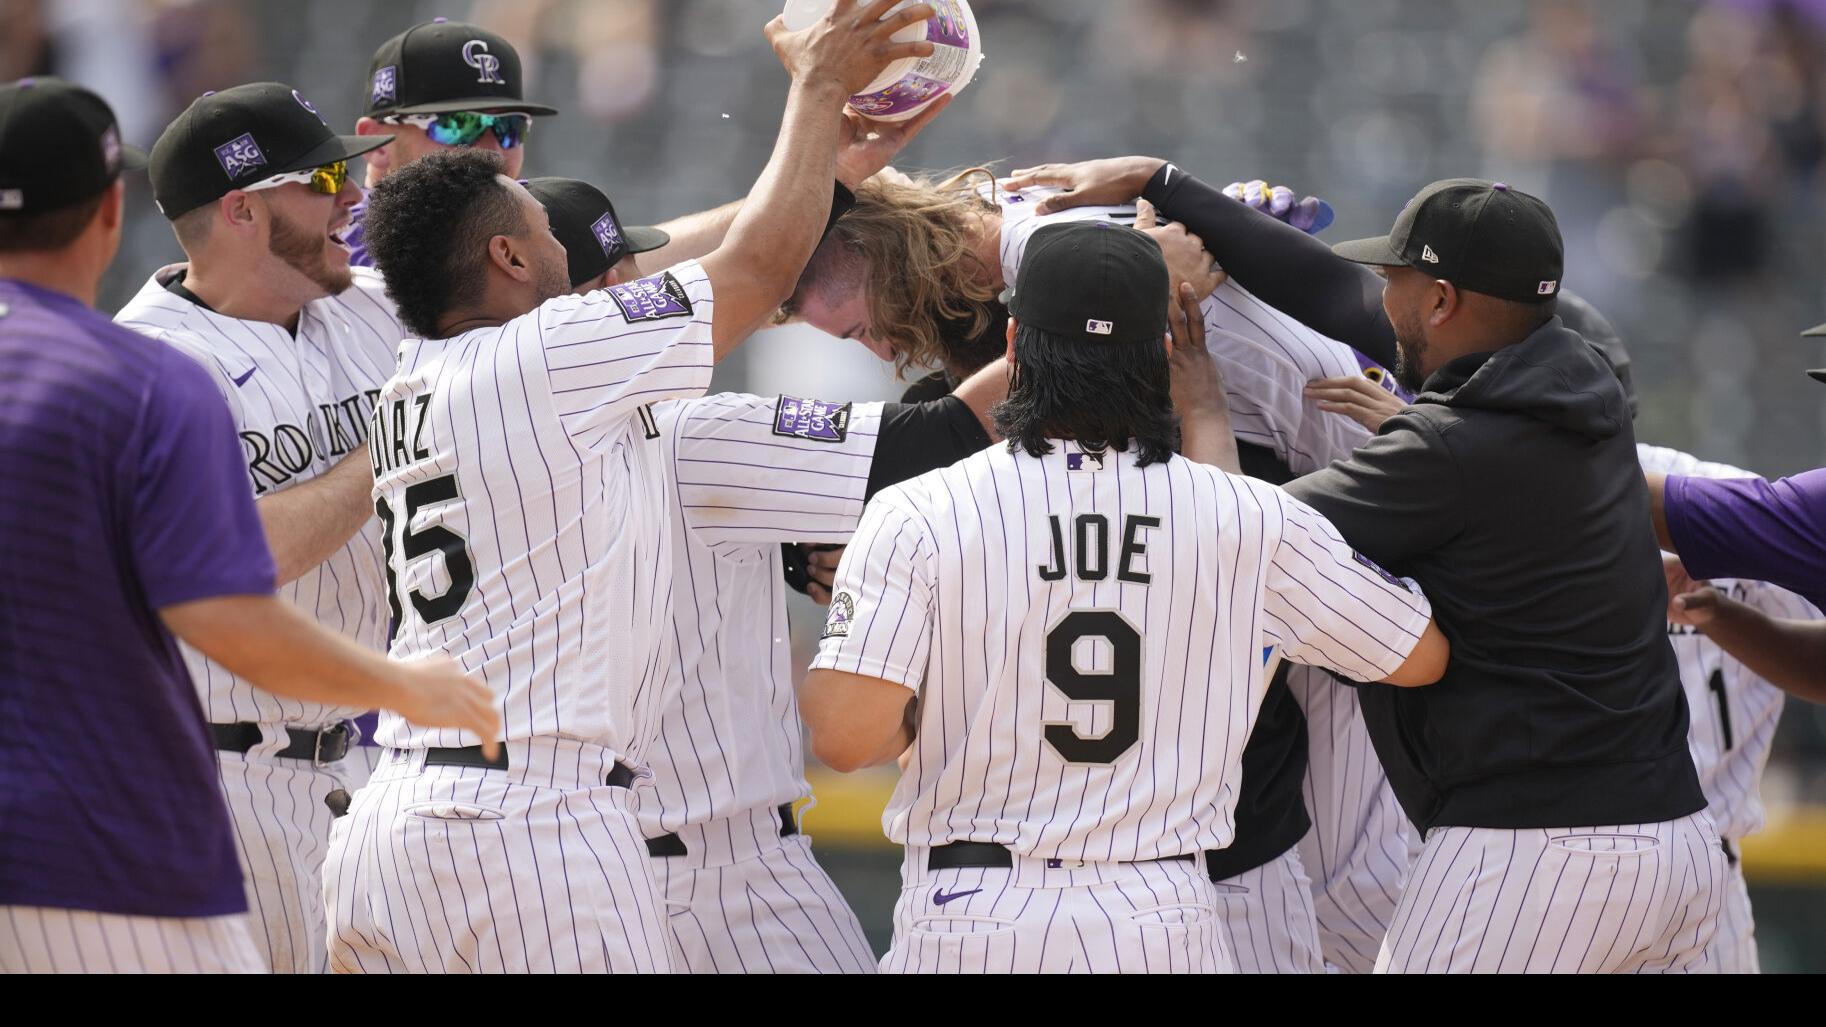 Charlie Blackmon hits a walk-off single as the Rockies sweep the Padres, Sports